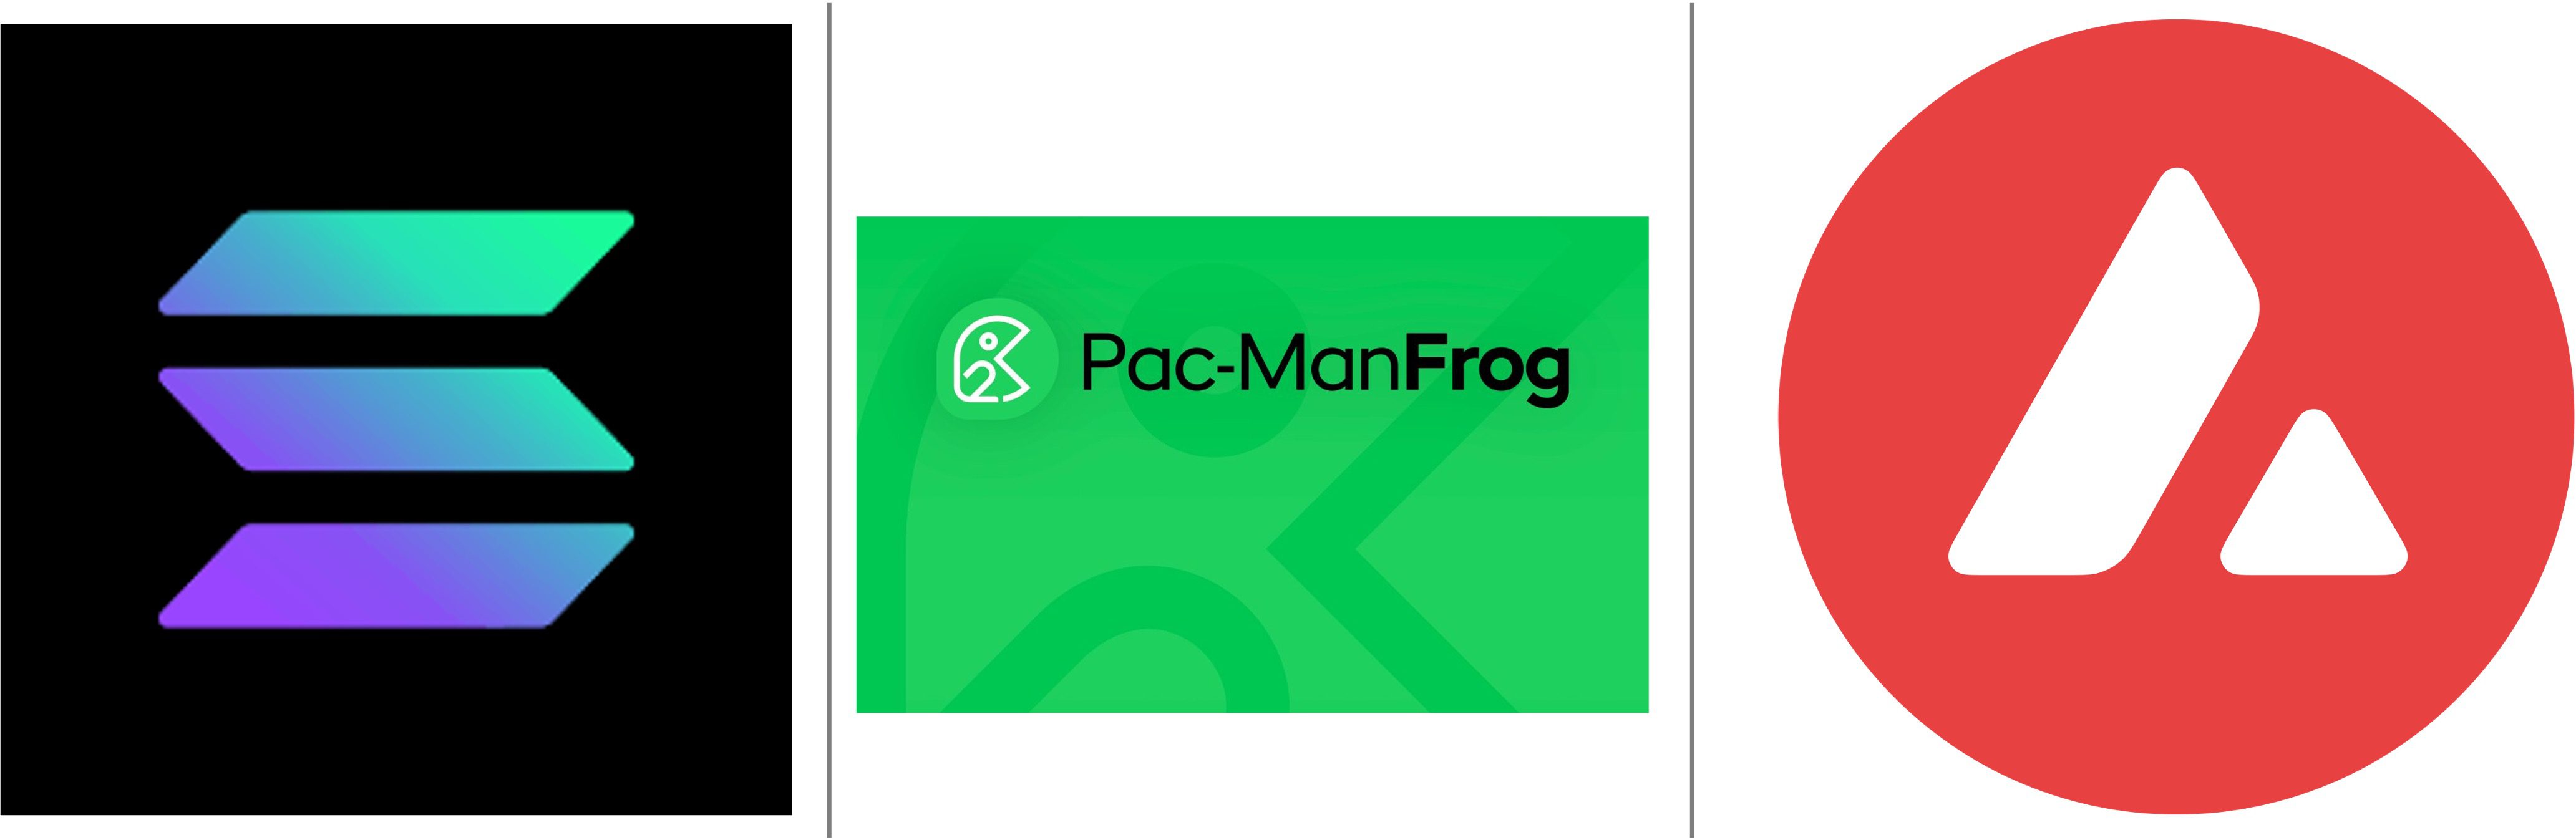 Be A Part Of The NFT Revolution With ApeCoin (APE), Flow (FLOW), and Pac-Man Frog (PAC)